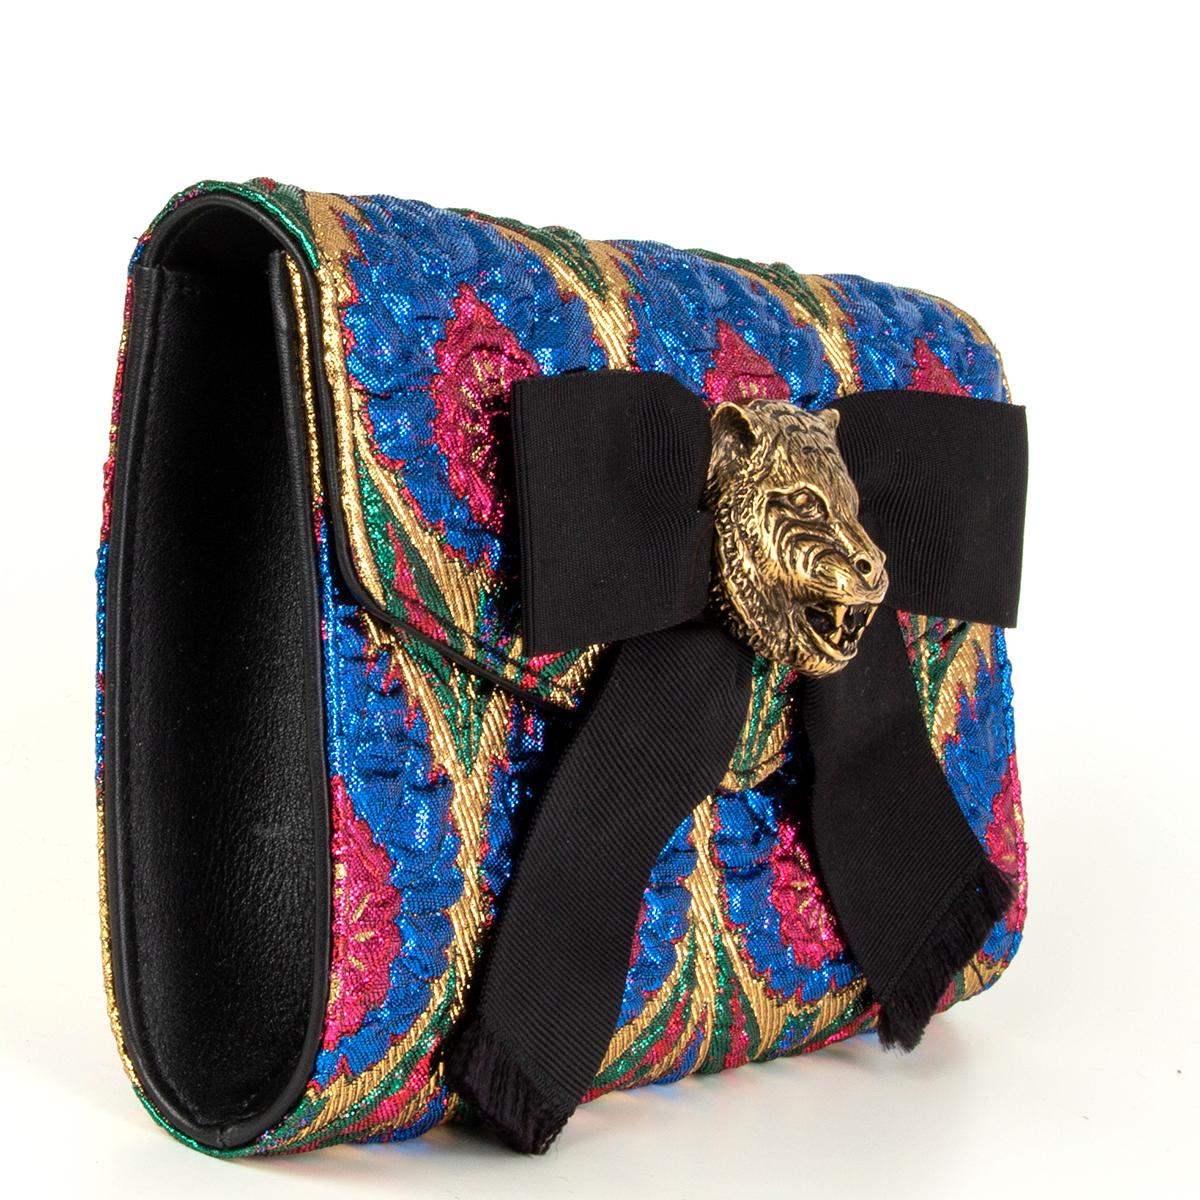 Gucci 'Animalier Broadway' clutch in pink, blue, gold and green brocade. Opens with a magnetic closure and is lined in black and tan lambskin with one open pocket against the back. Antique gold-tone feline head and black gros grain bow detail. Has